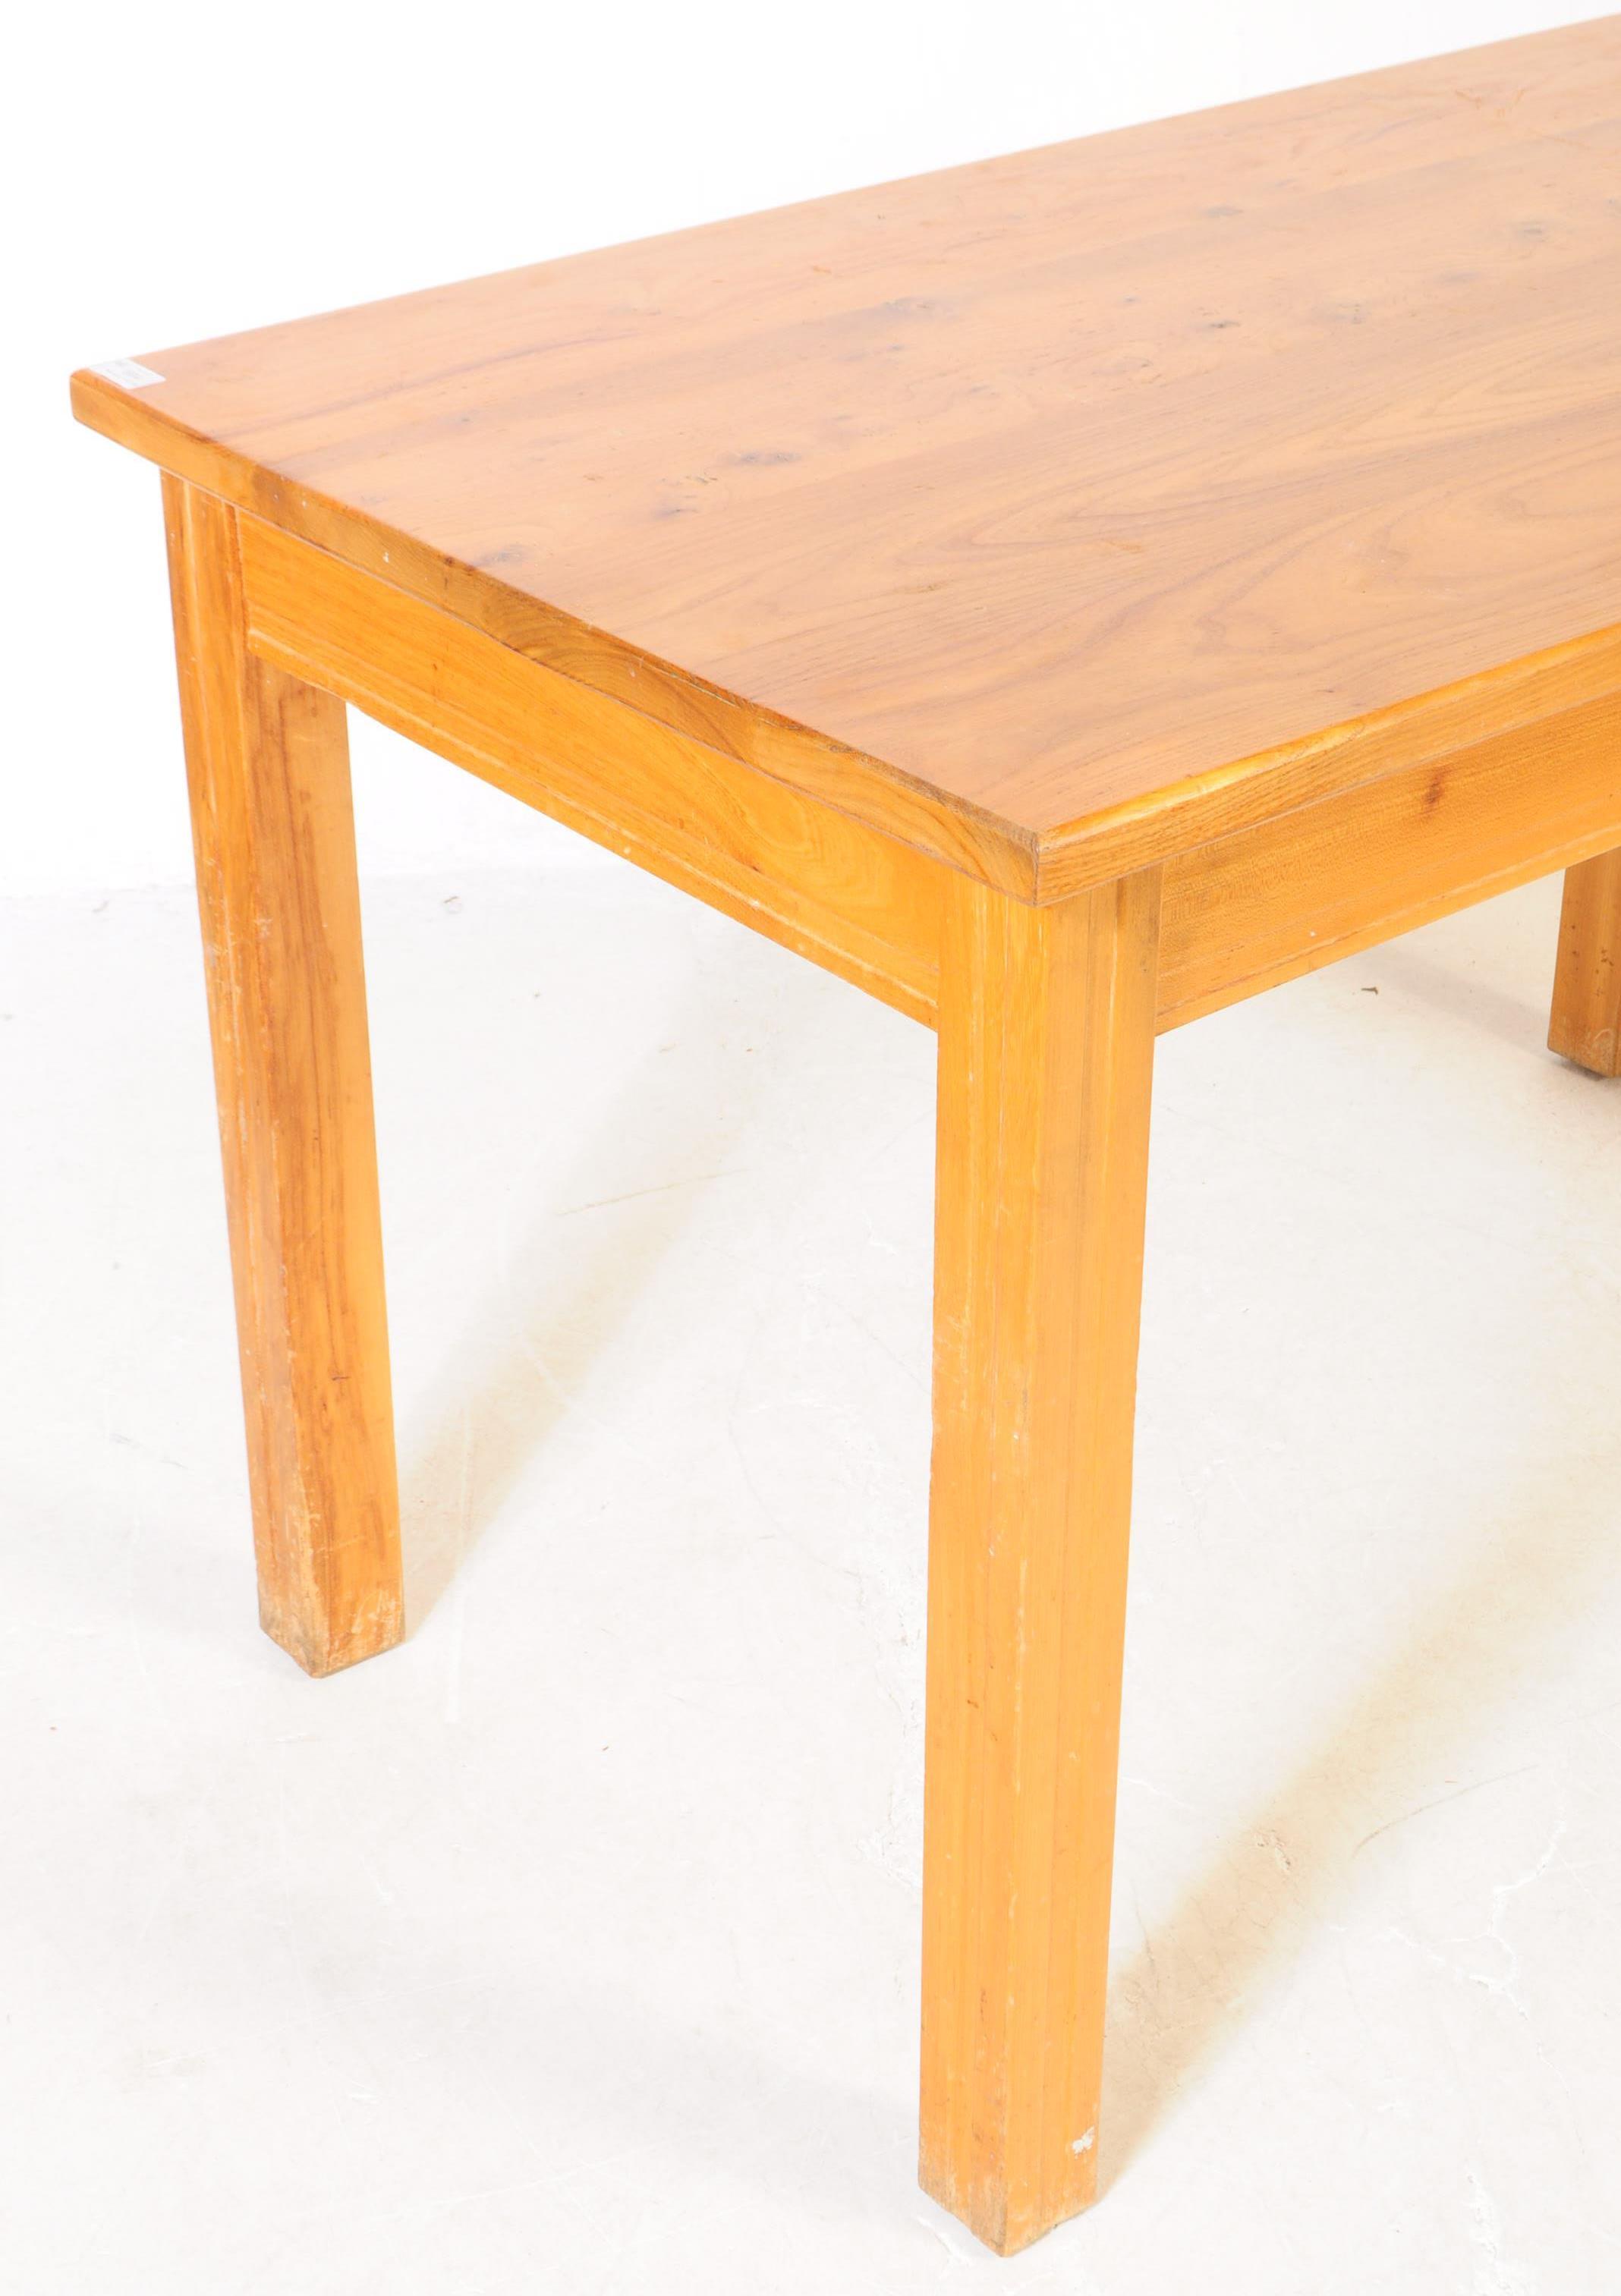 CONTEMPORARY PINE DINING TABLE - Image 2 of 3